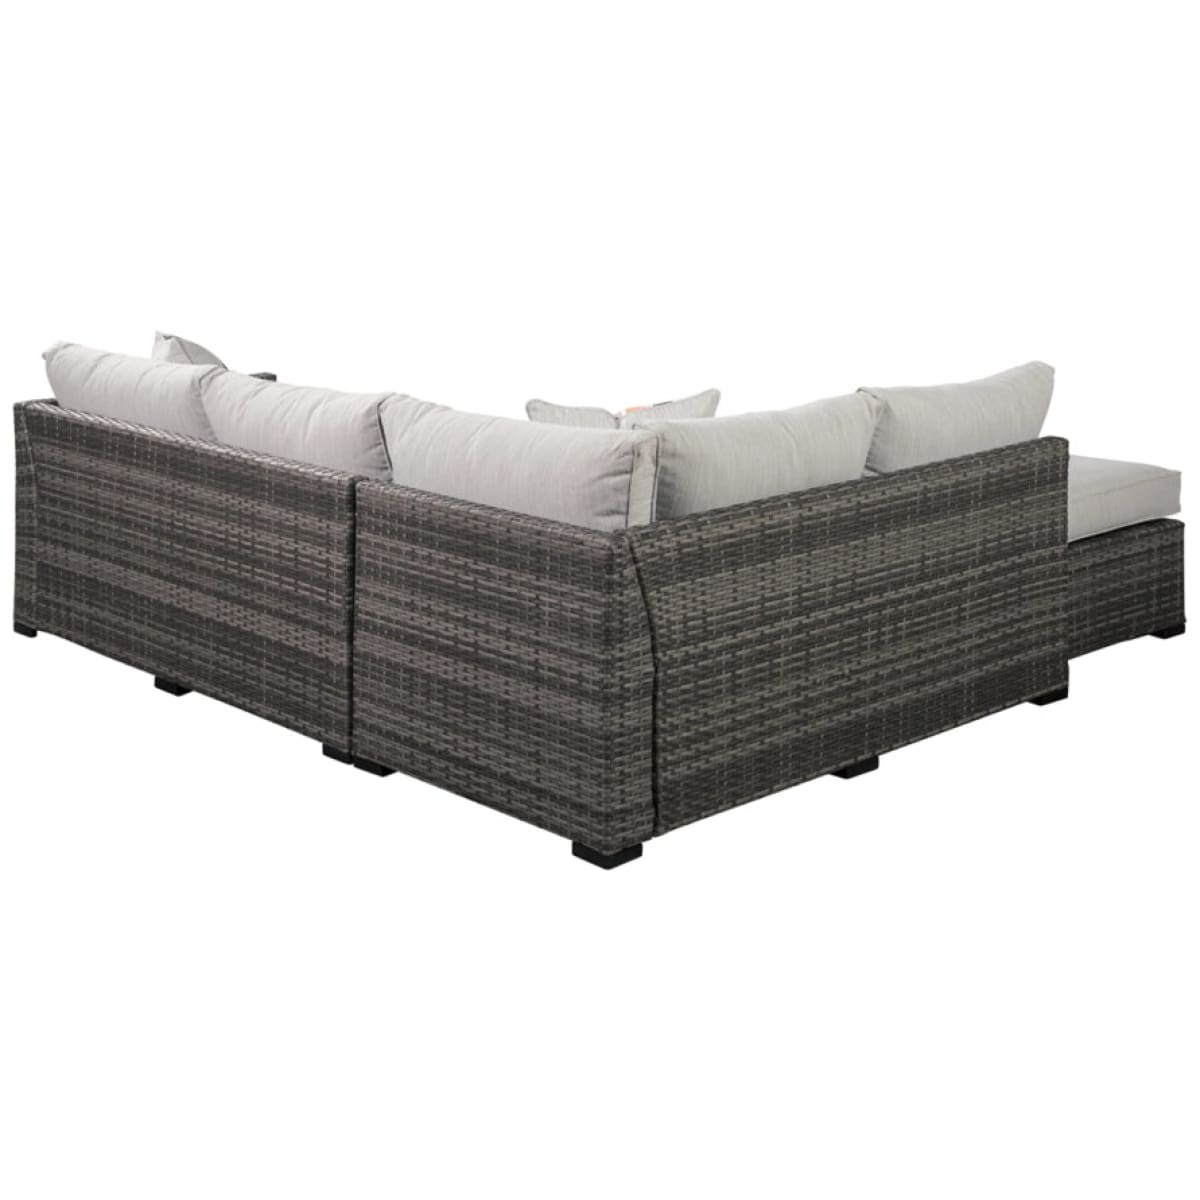 Cherry Point 4-piece Outdoor Sectional Set - 90 W x 85.5 D x 31.5 H - Outdoor Sofa